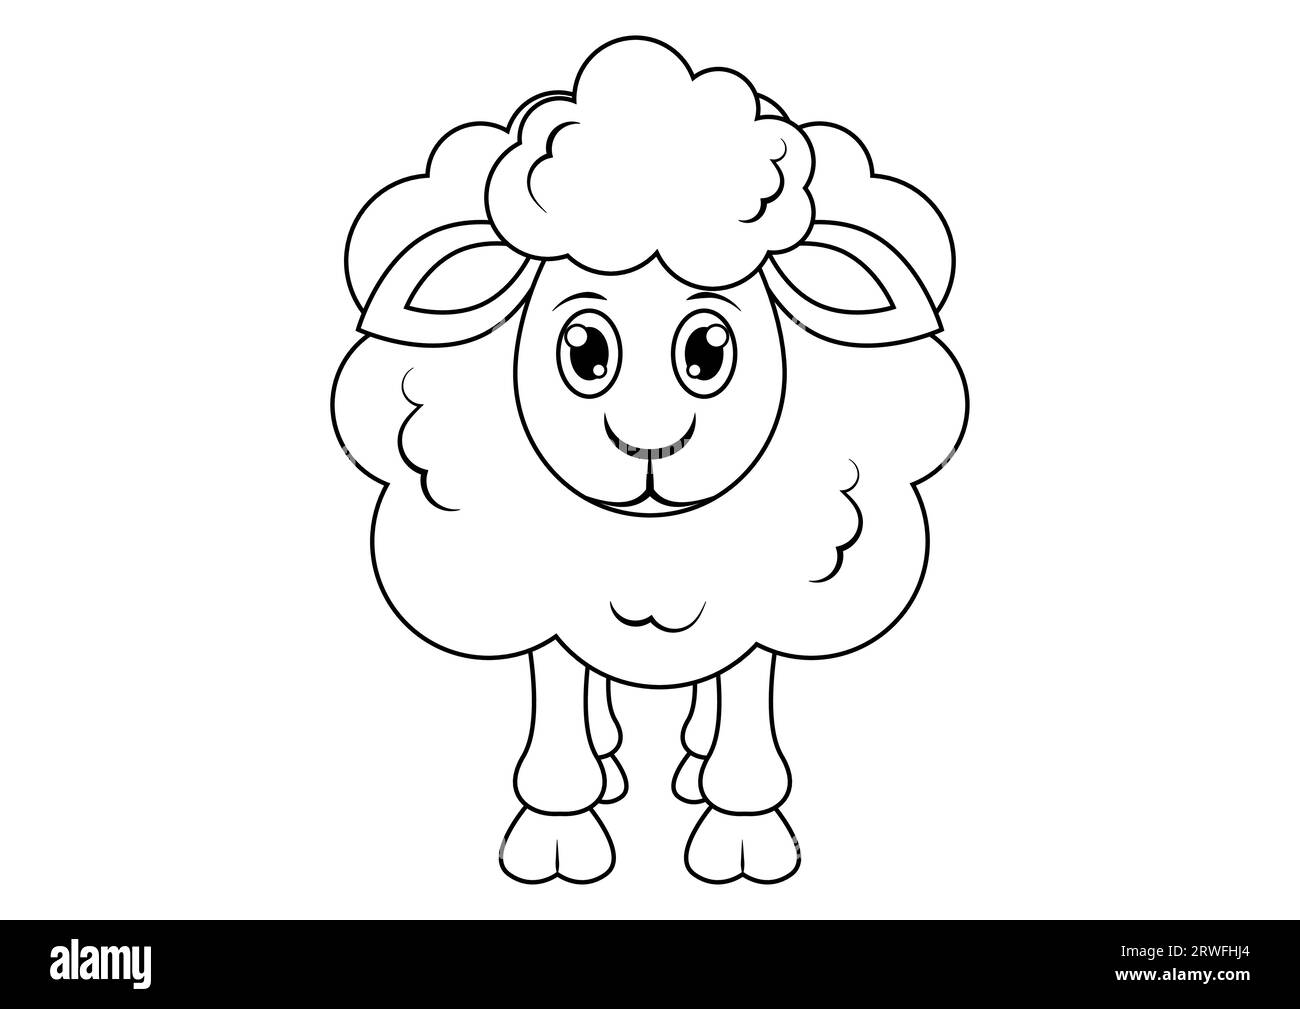 Black and White Sheep Cartoon Character Vector. Coloring Page of a Sheep Stock Vector